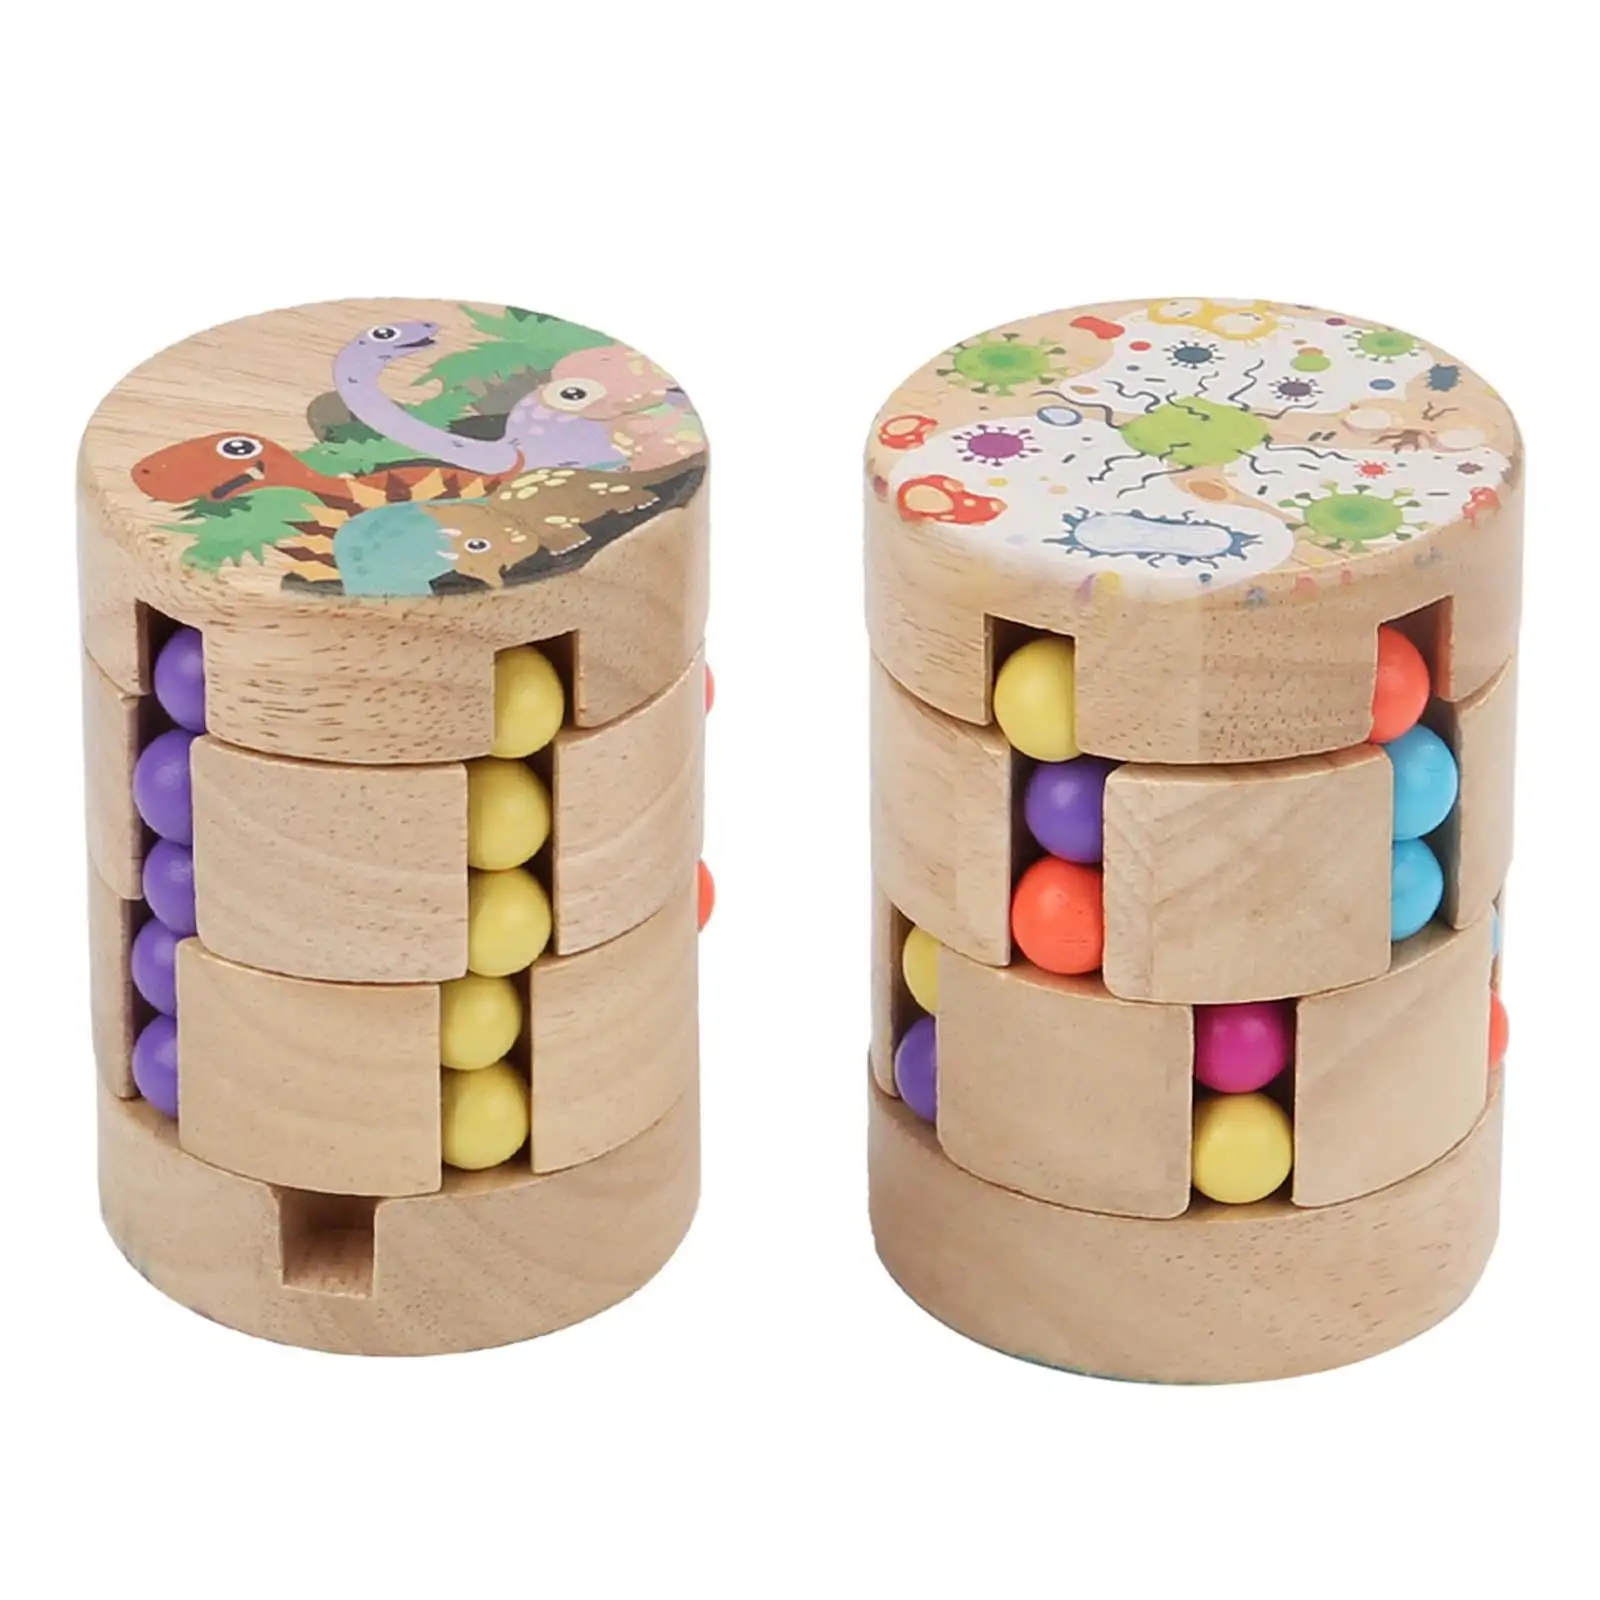 Wooden Beads Educational Intelligence Development Toy Play Fun for Boys Girls Kids Birthday Gifts